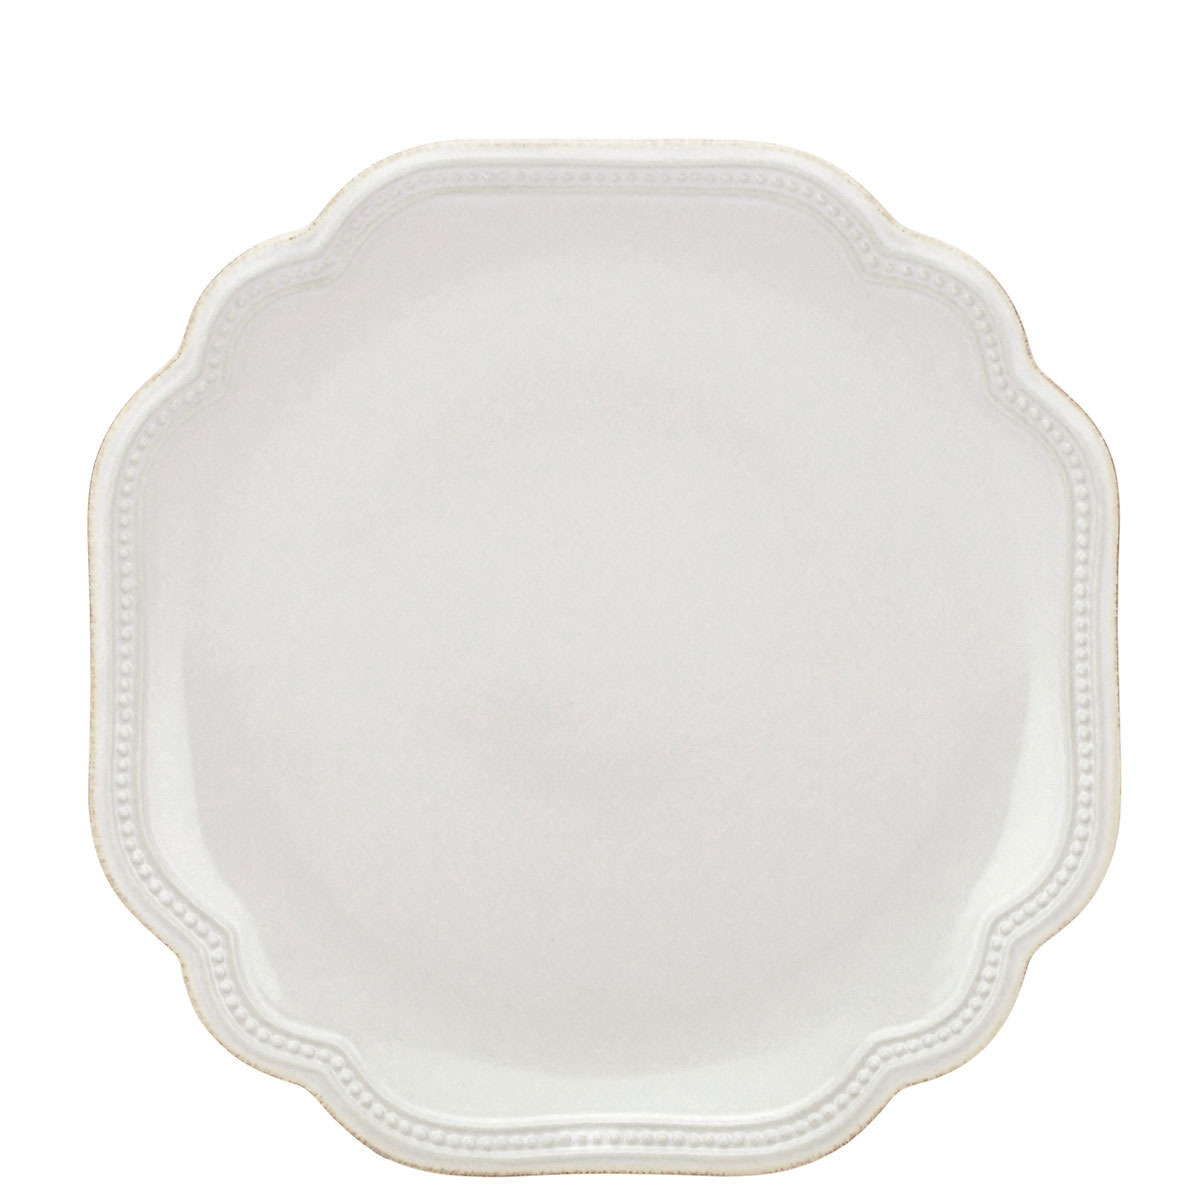 Lenox French Perle Bead White Dinnerware Accent Plate 9"